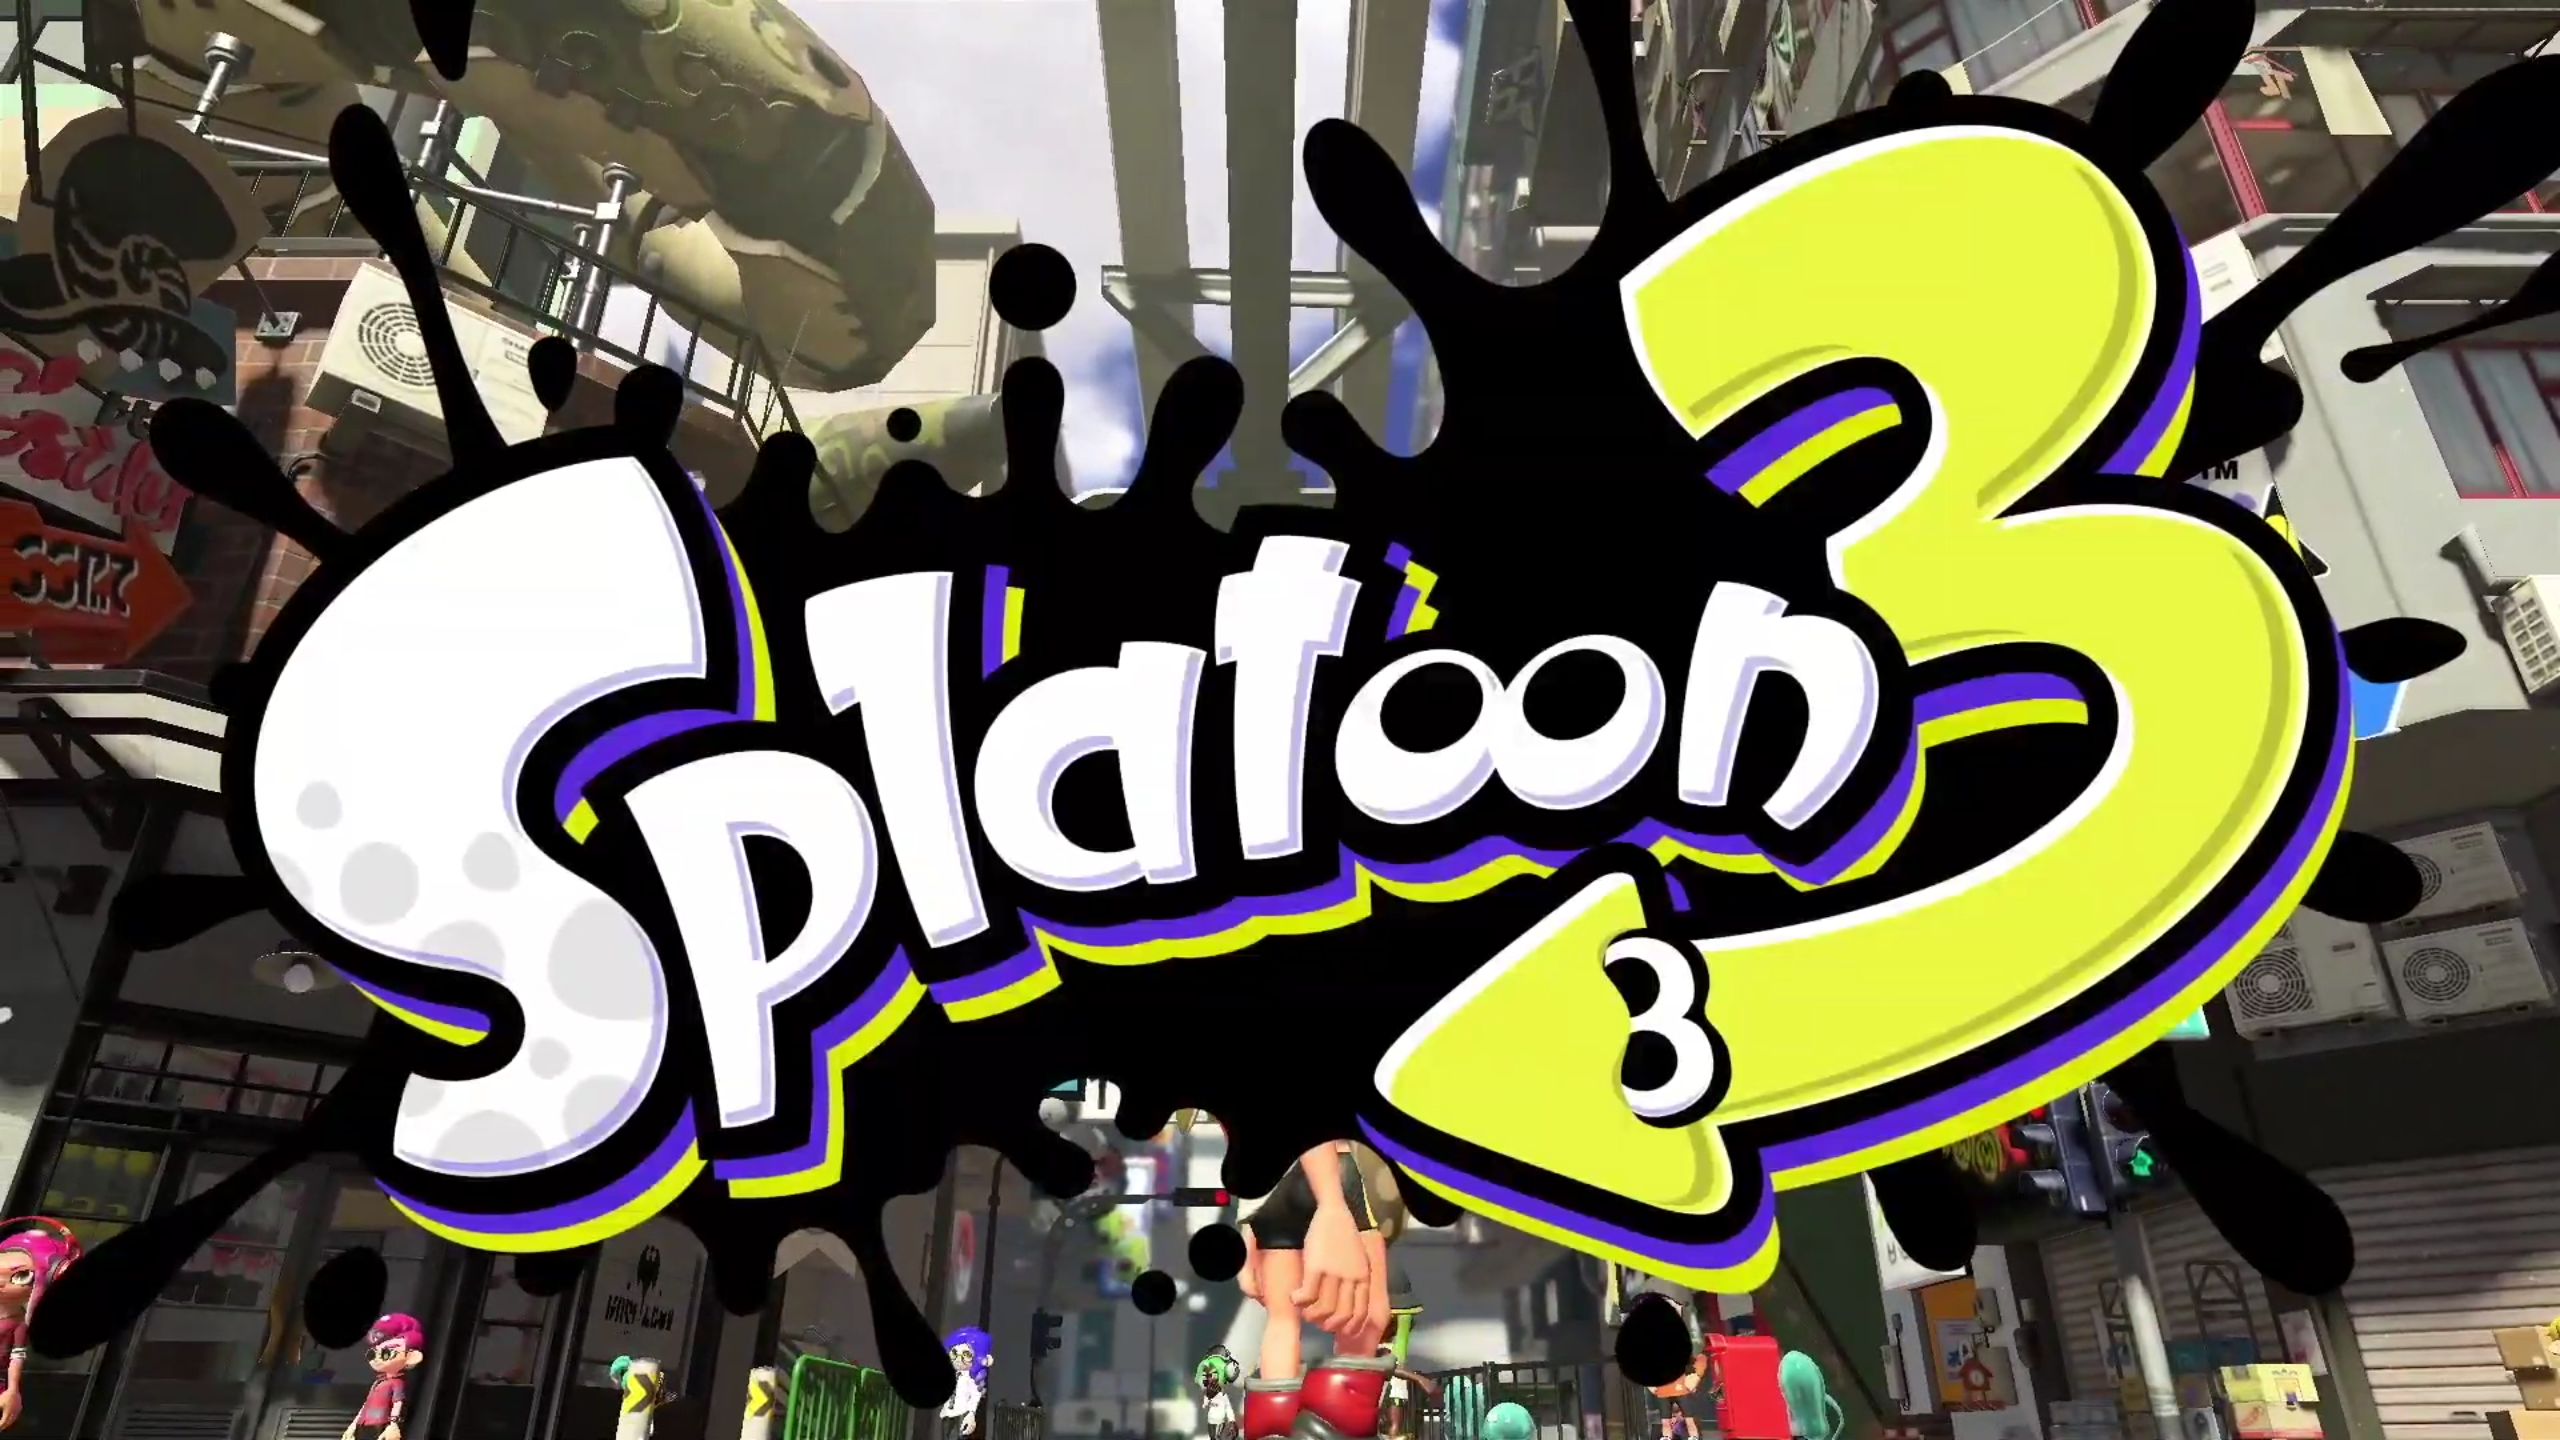 Nintendo Direct: Splatoon 3, Skyward Sword and more trailers to watch - CNET